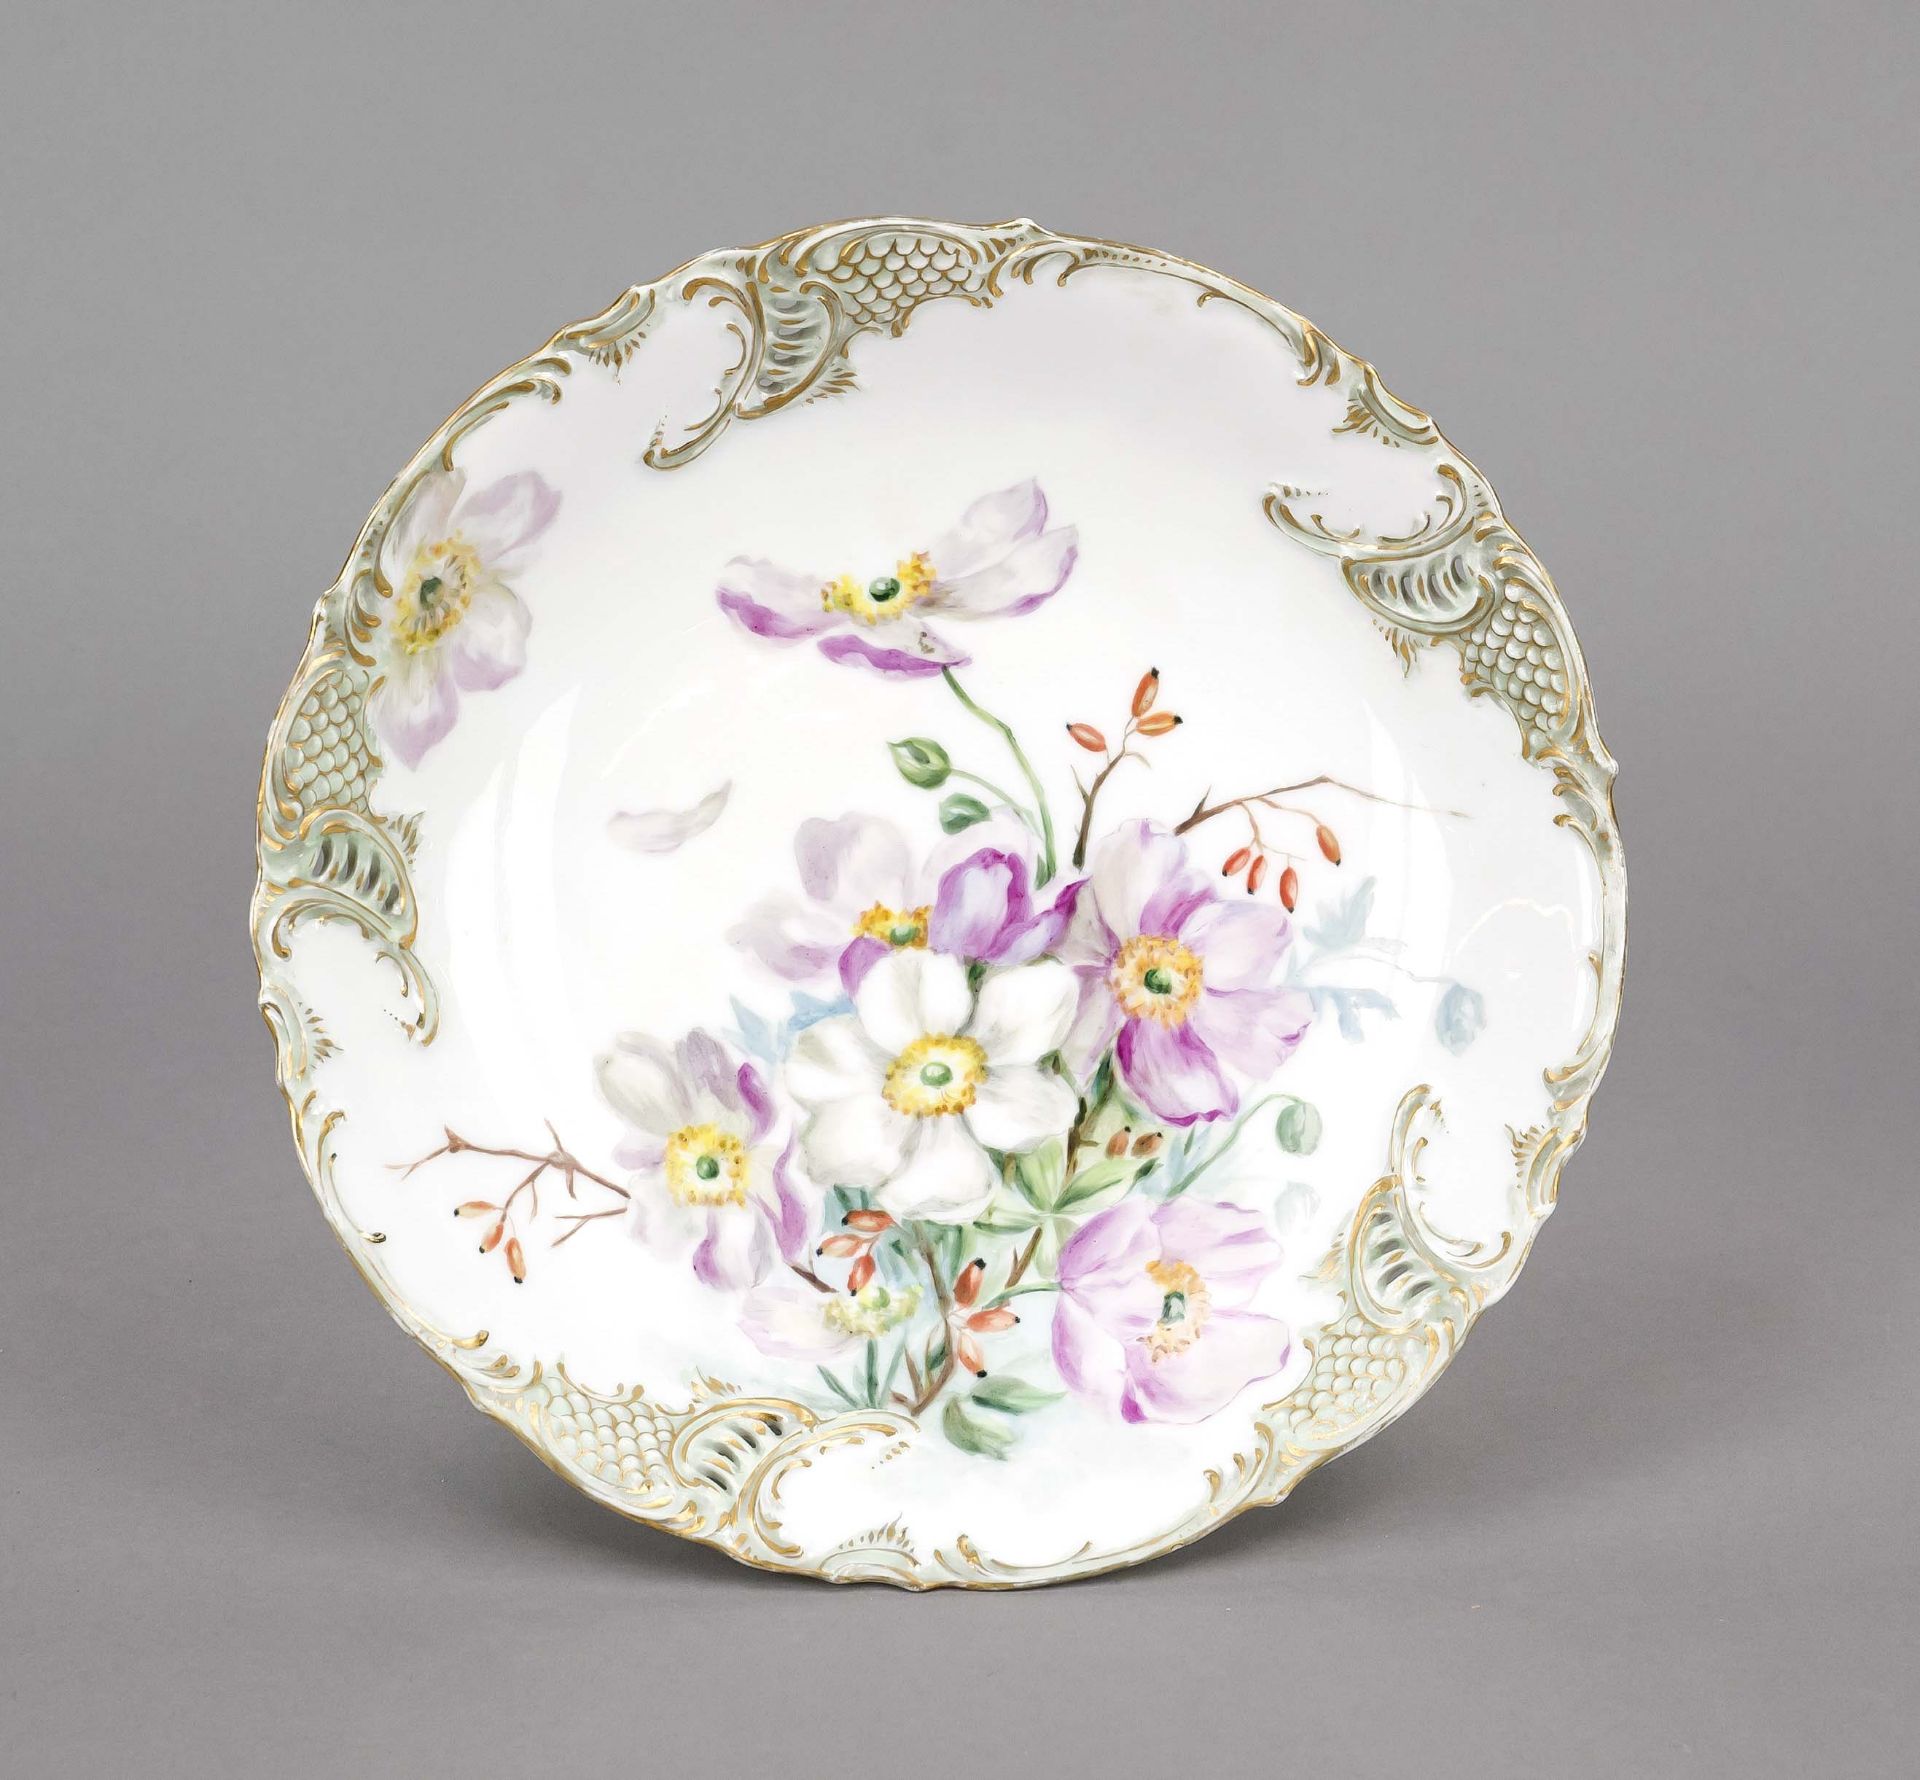 Round centerpiece, Nymphenburg, 20th century, round curved stand, on 4 feet, shallow dish with - Image 2 of 2